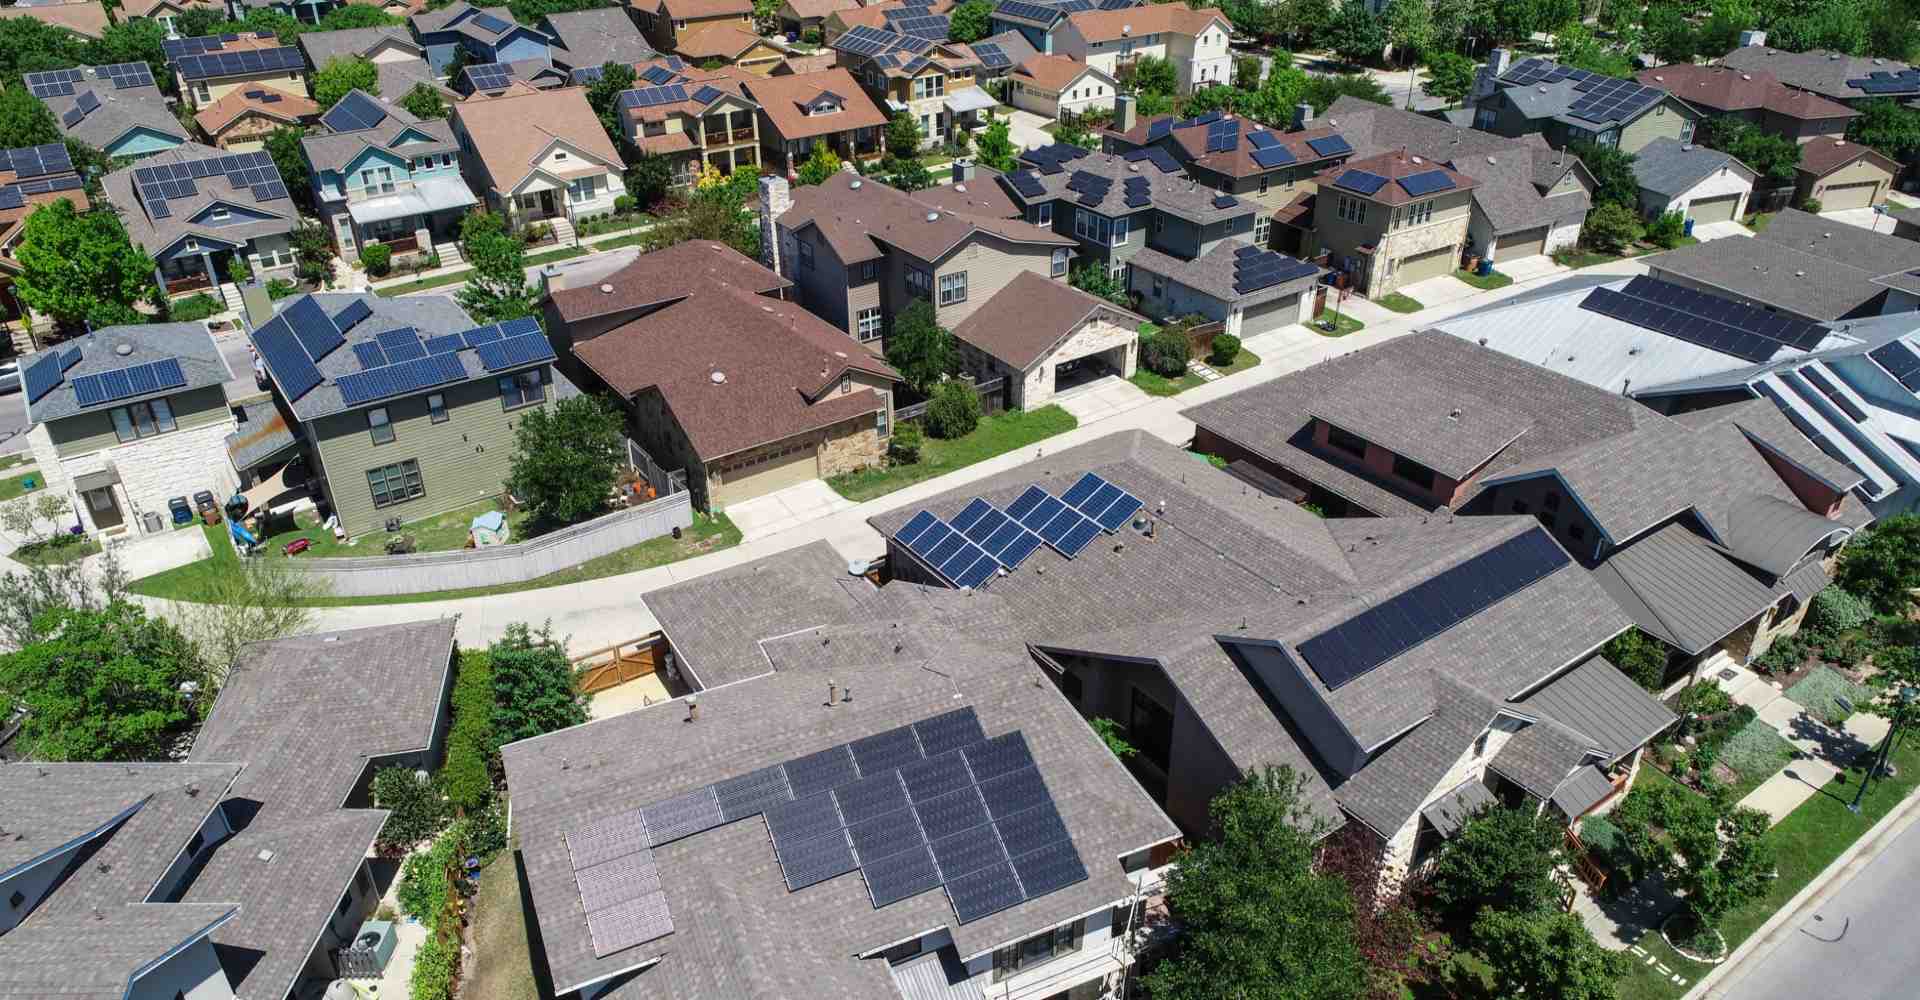 How much does it cost to solar power a house?